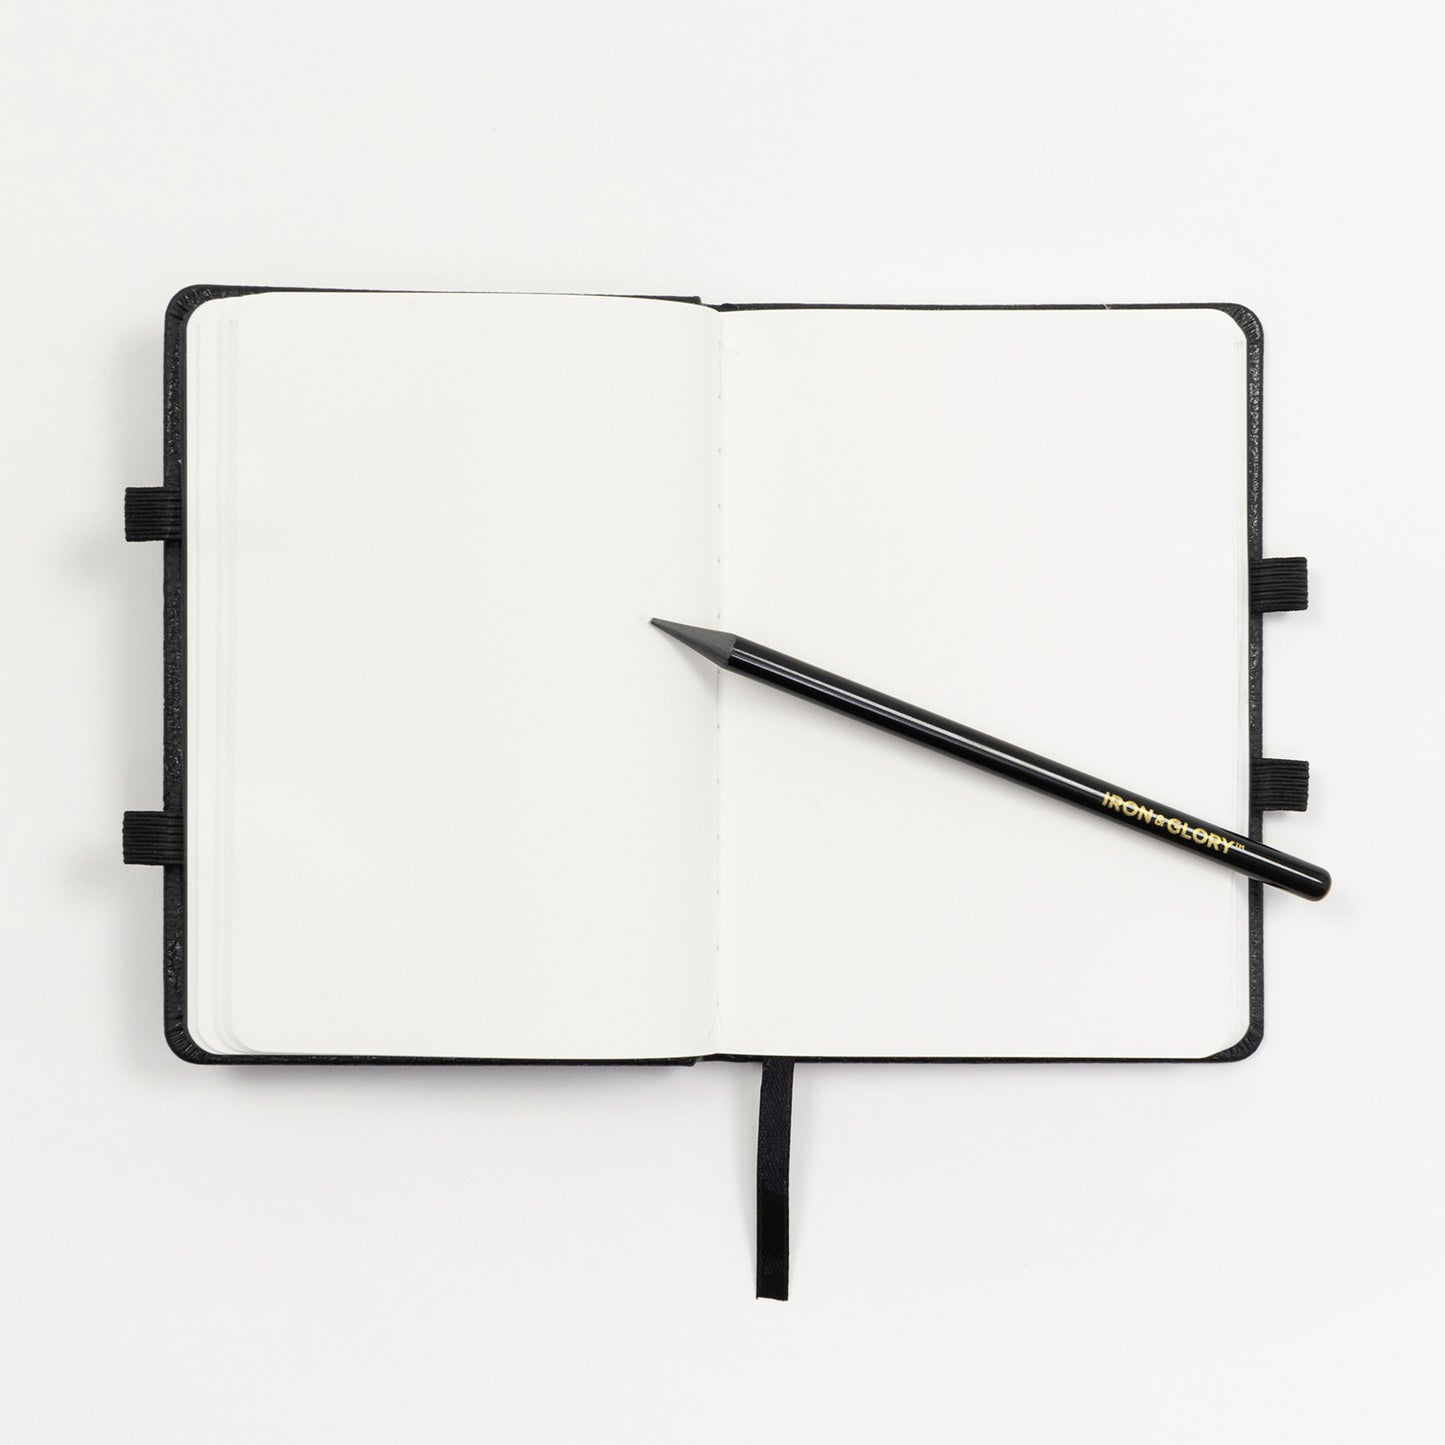 An open notebook with blank pages. A graphite pencil rests on the open page. Pictured on a white background.